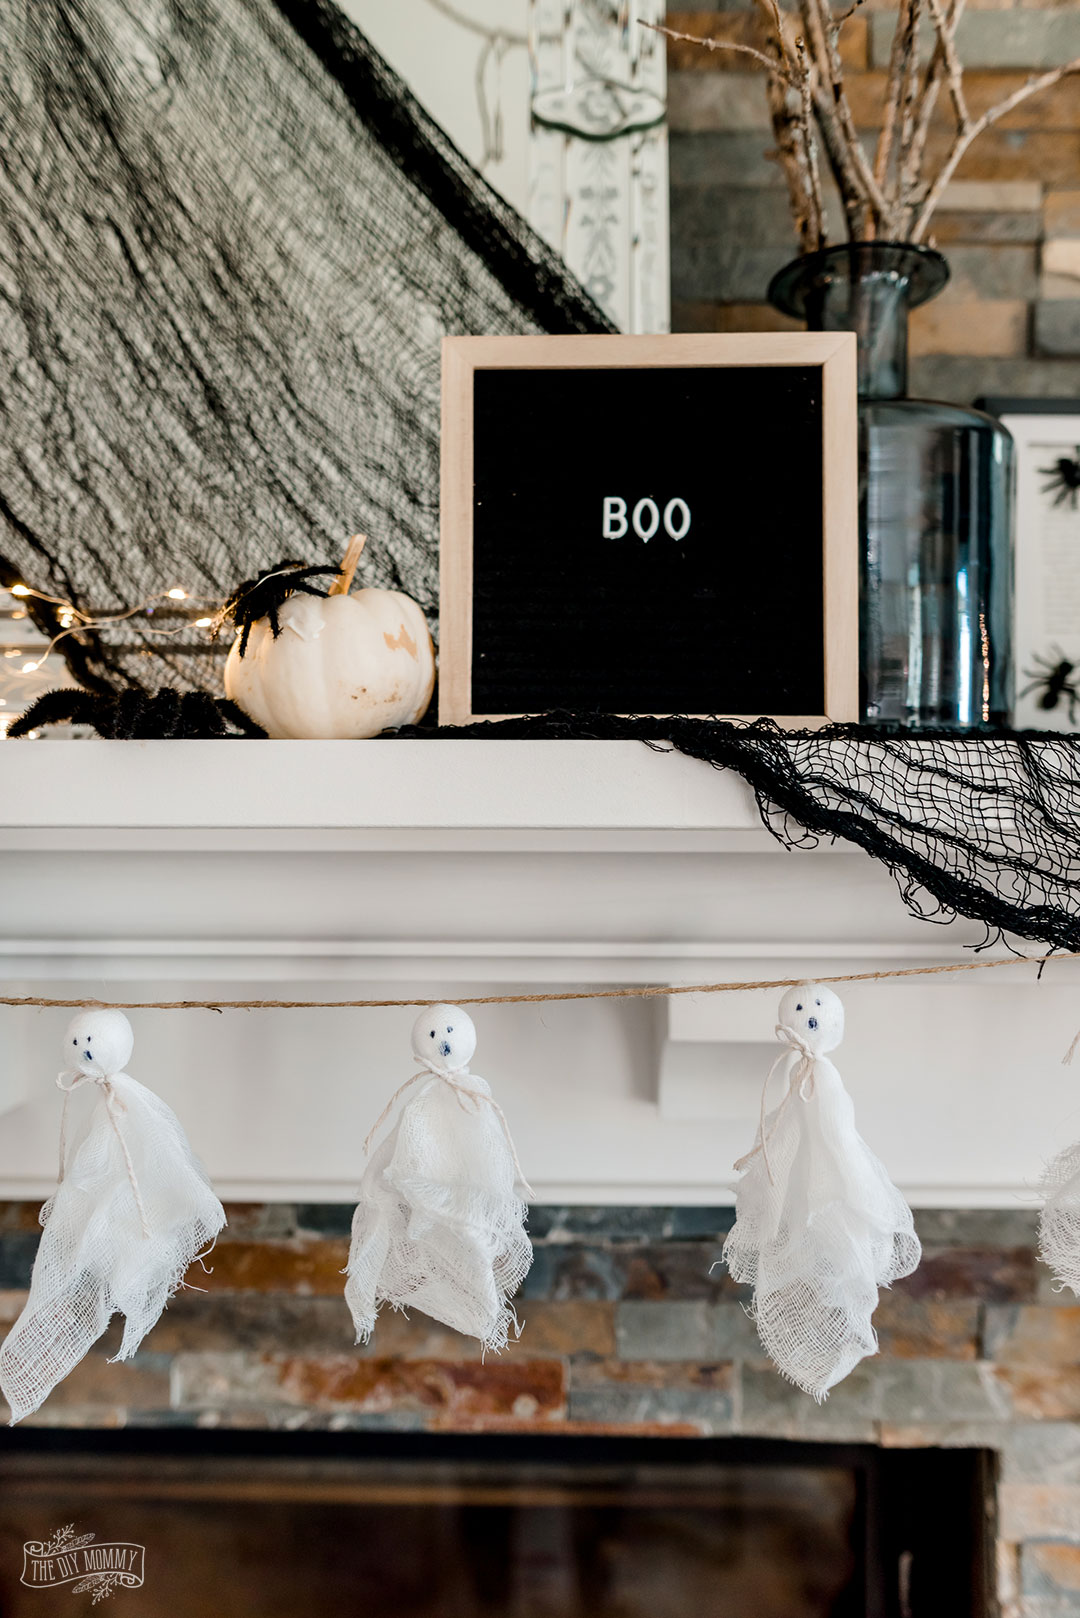 Cute DIY and decorating ideas from the dollar store for Halloween